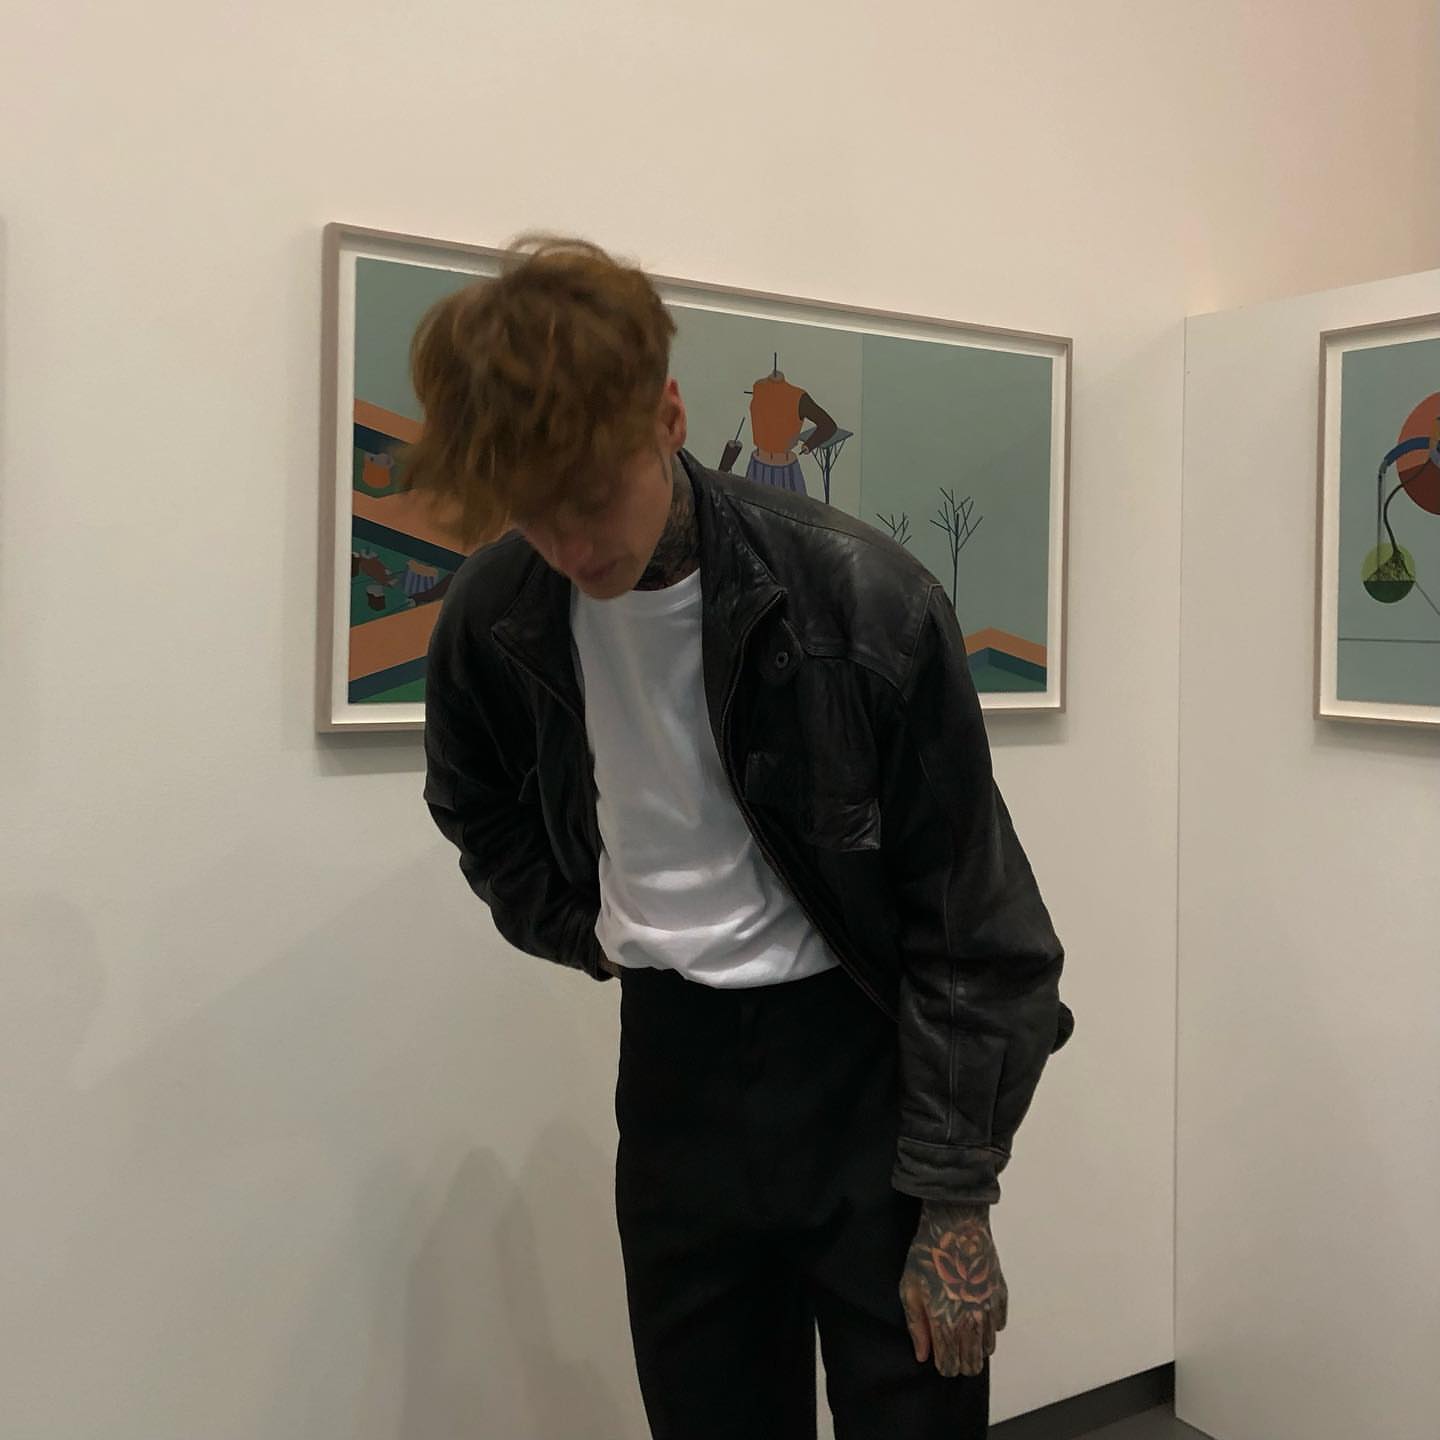 just looking at some art 🖼